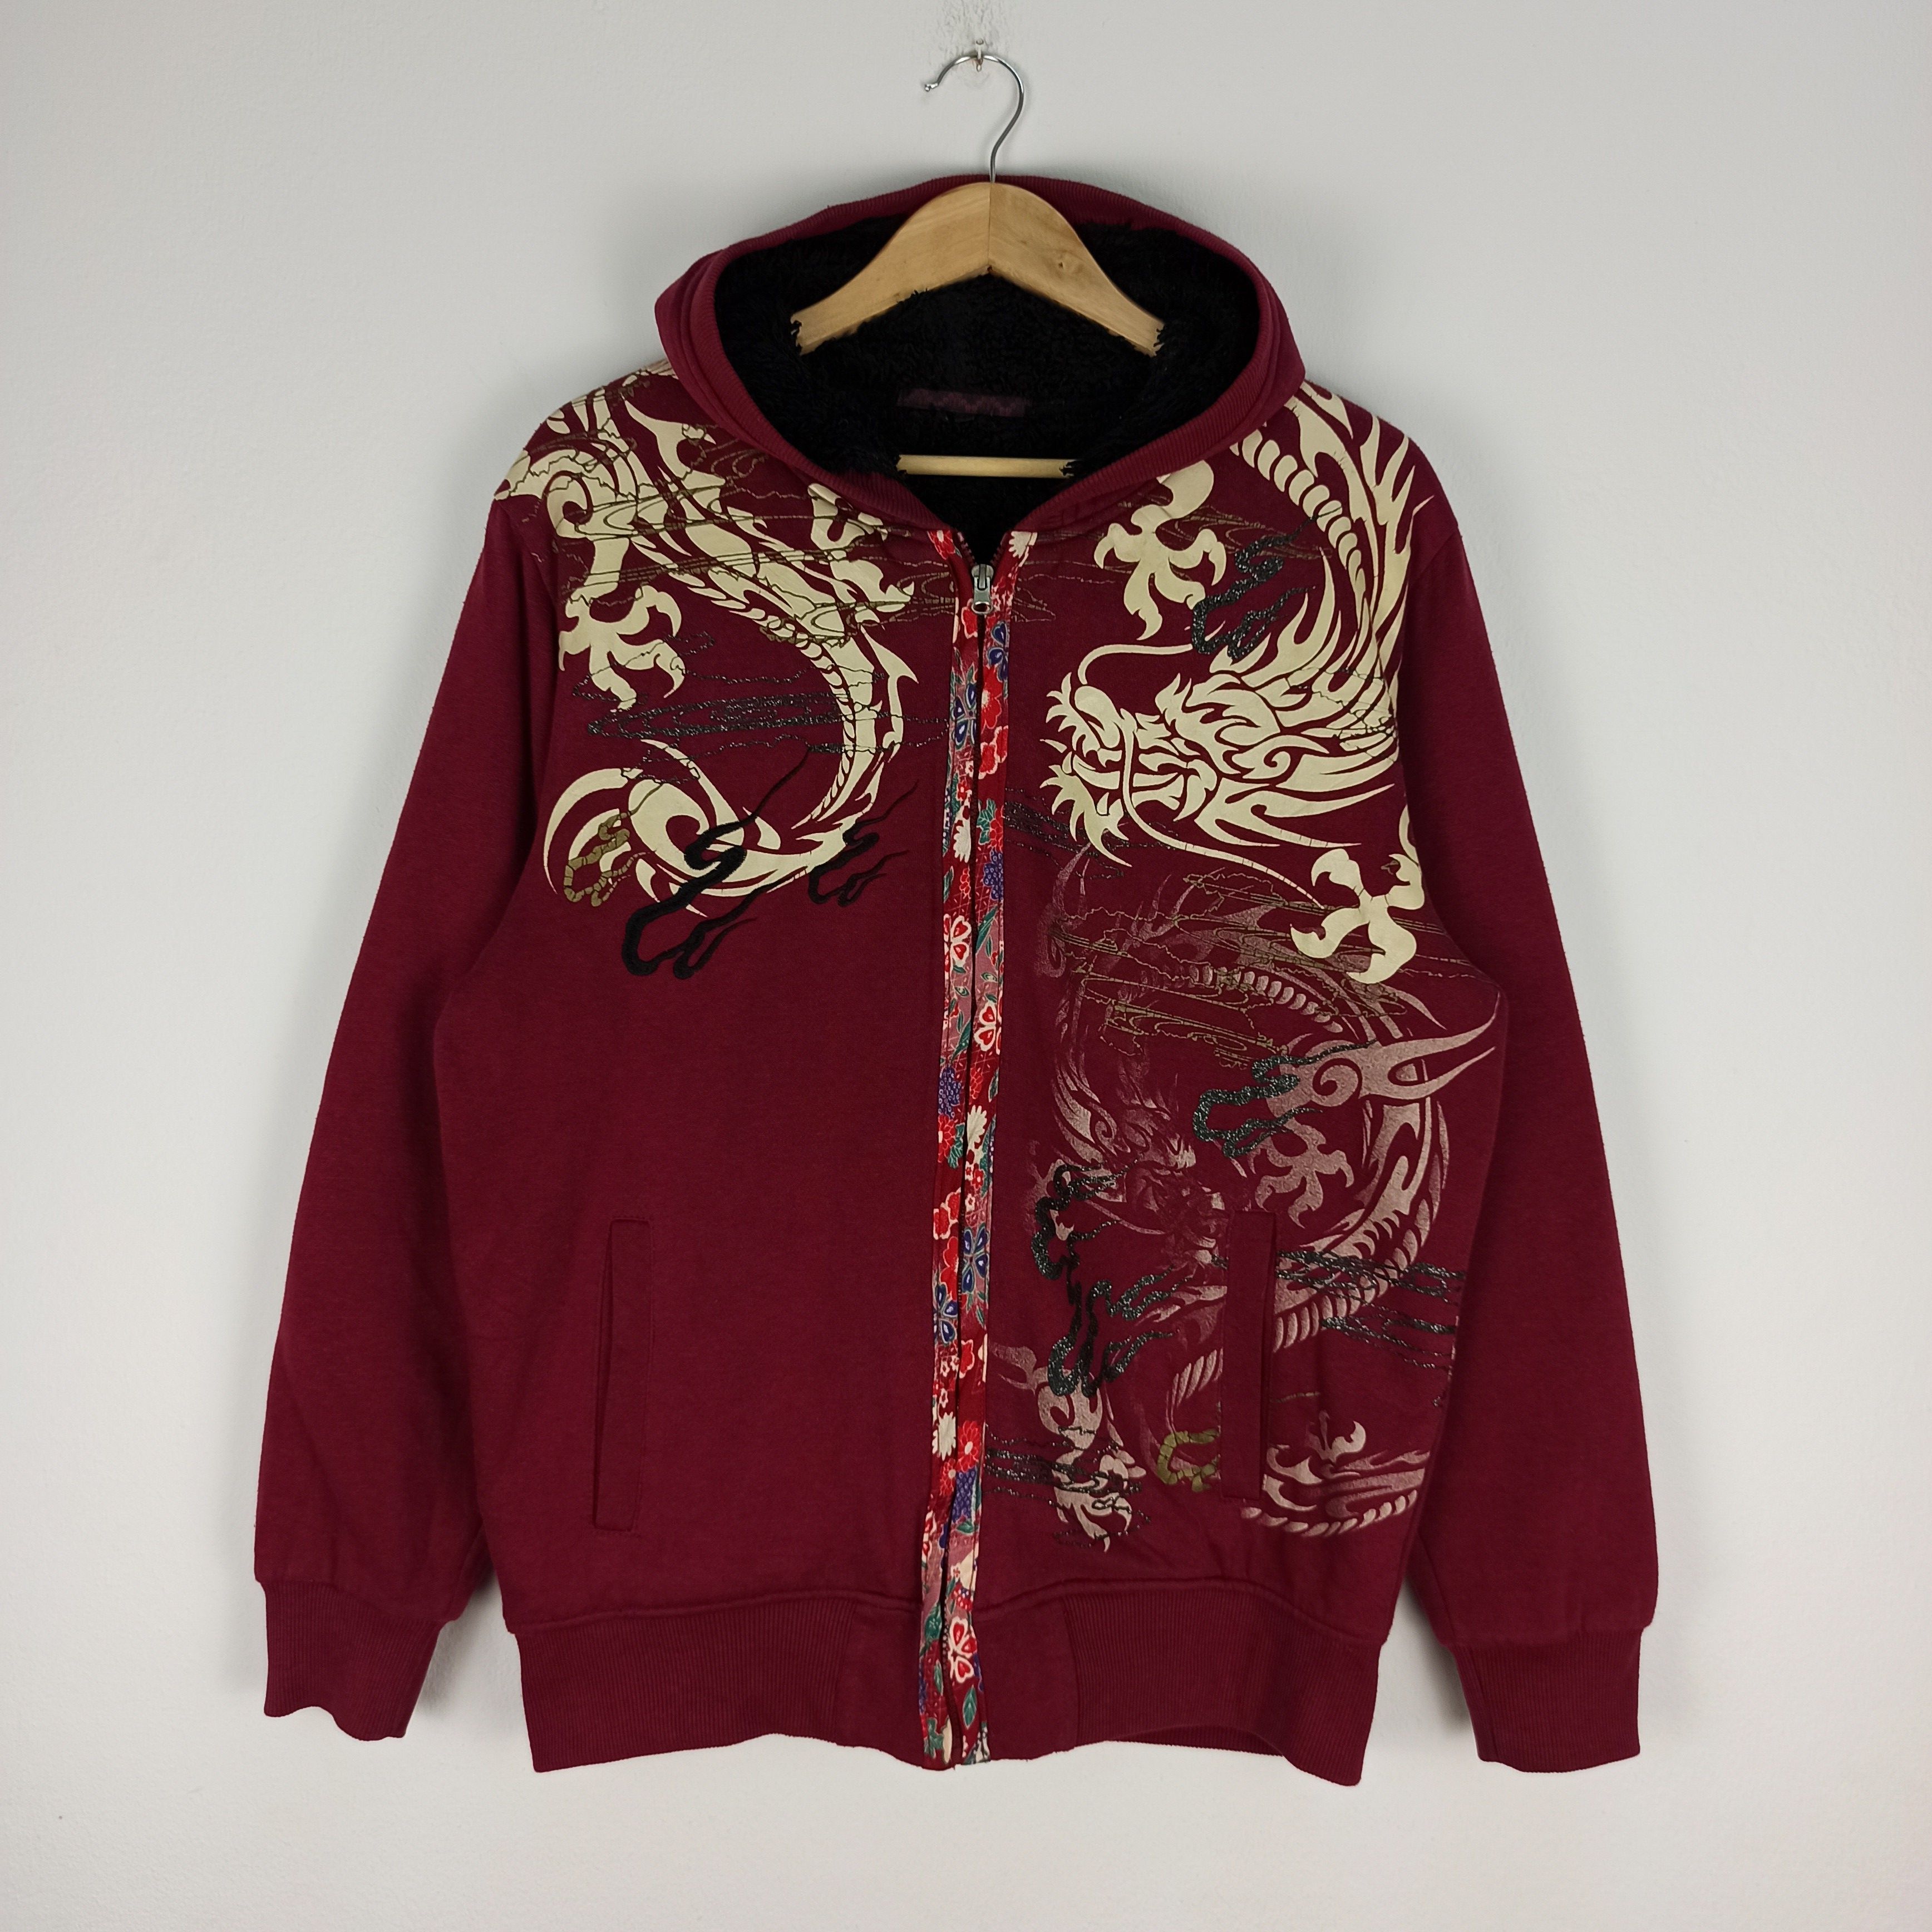 Pre-owned Dragonfly X Sukajan Souvenir Jacket Steals Dragon Fly Tattoo Spell Out Hoodie Inner Fleece In Red